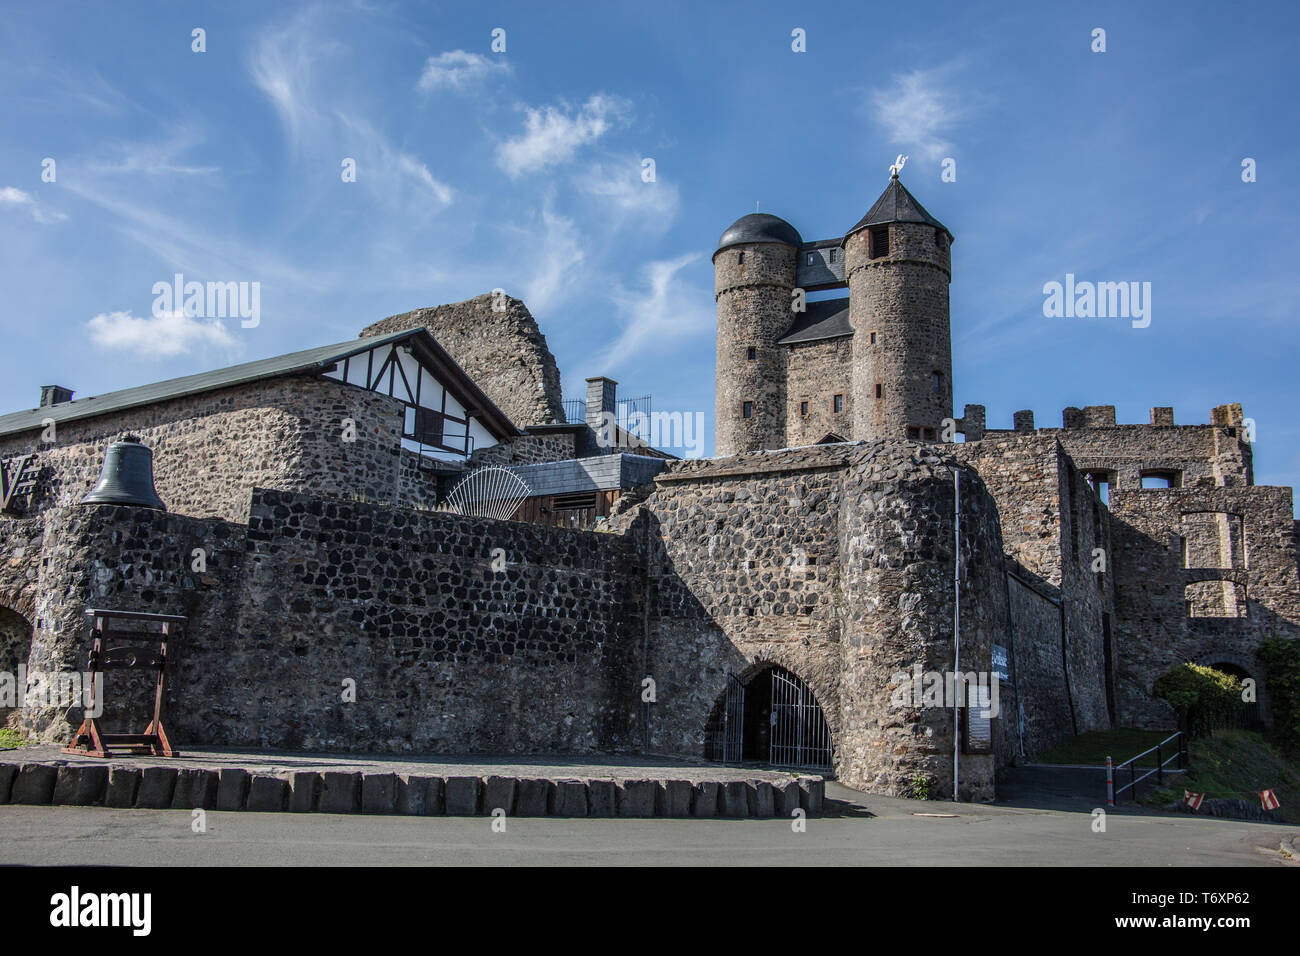 Best conserving castle in Germany Stock Photo